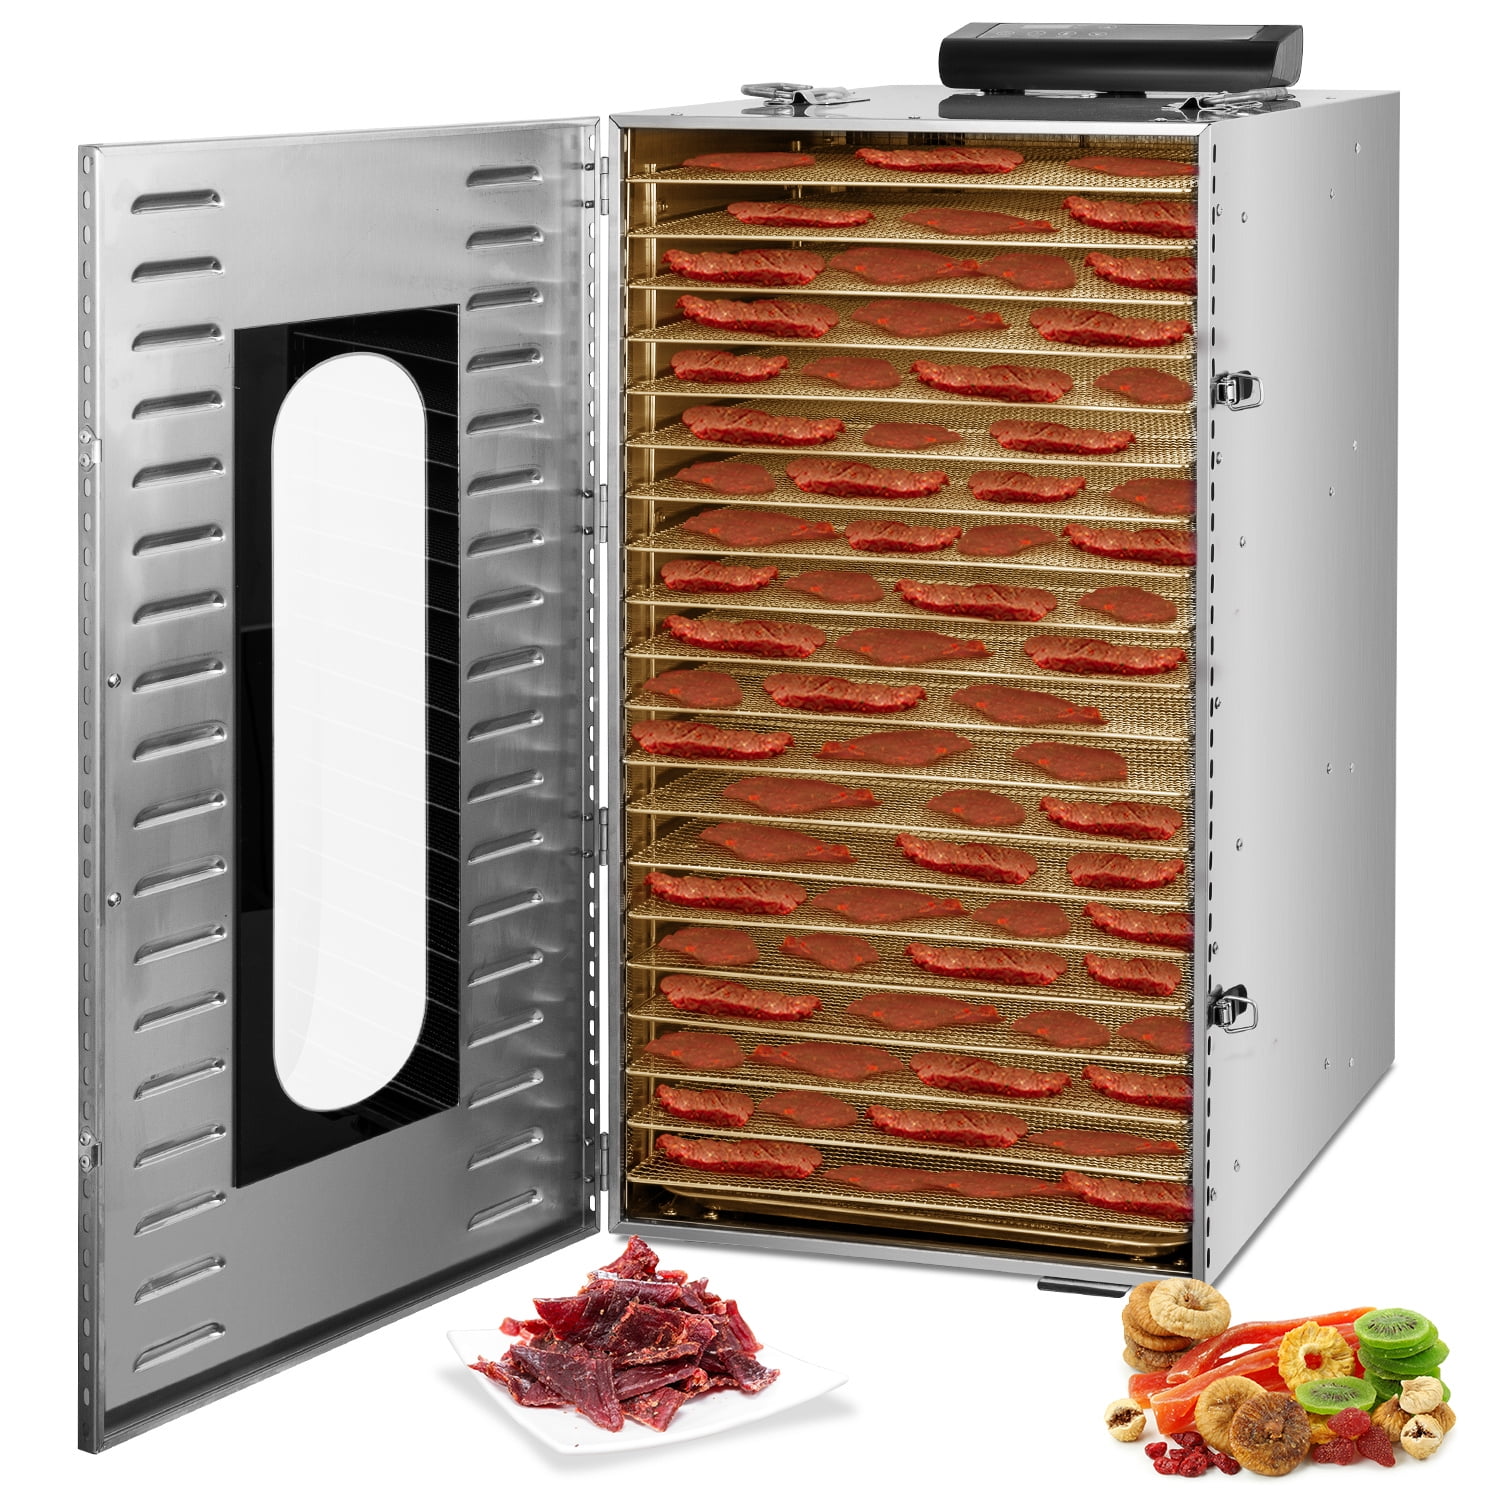 This Commercial Food Dehydrator is the Best One on the Market